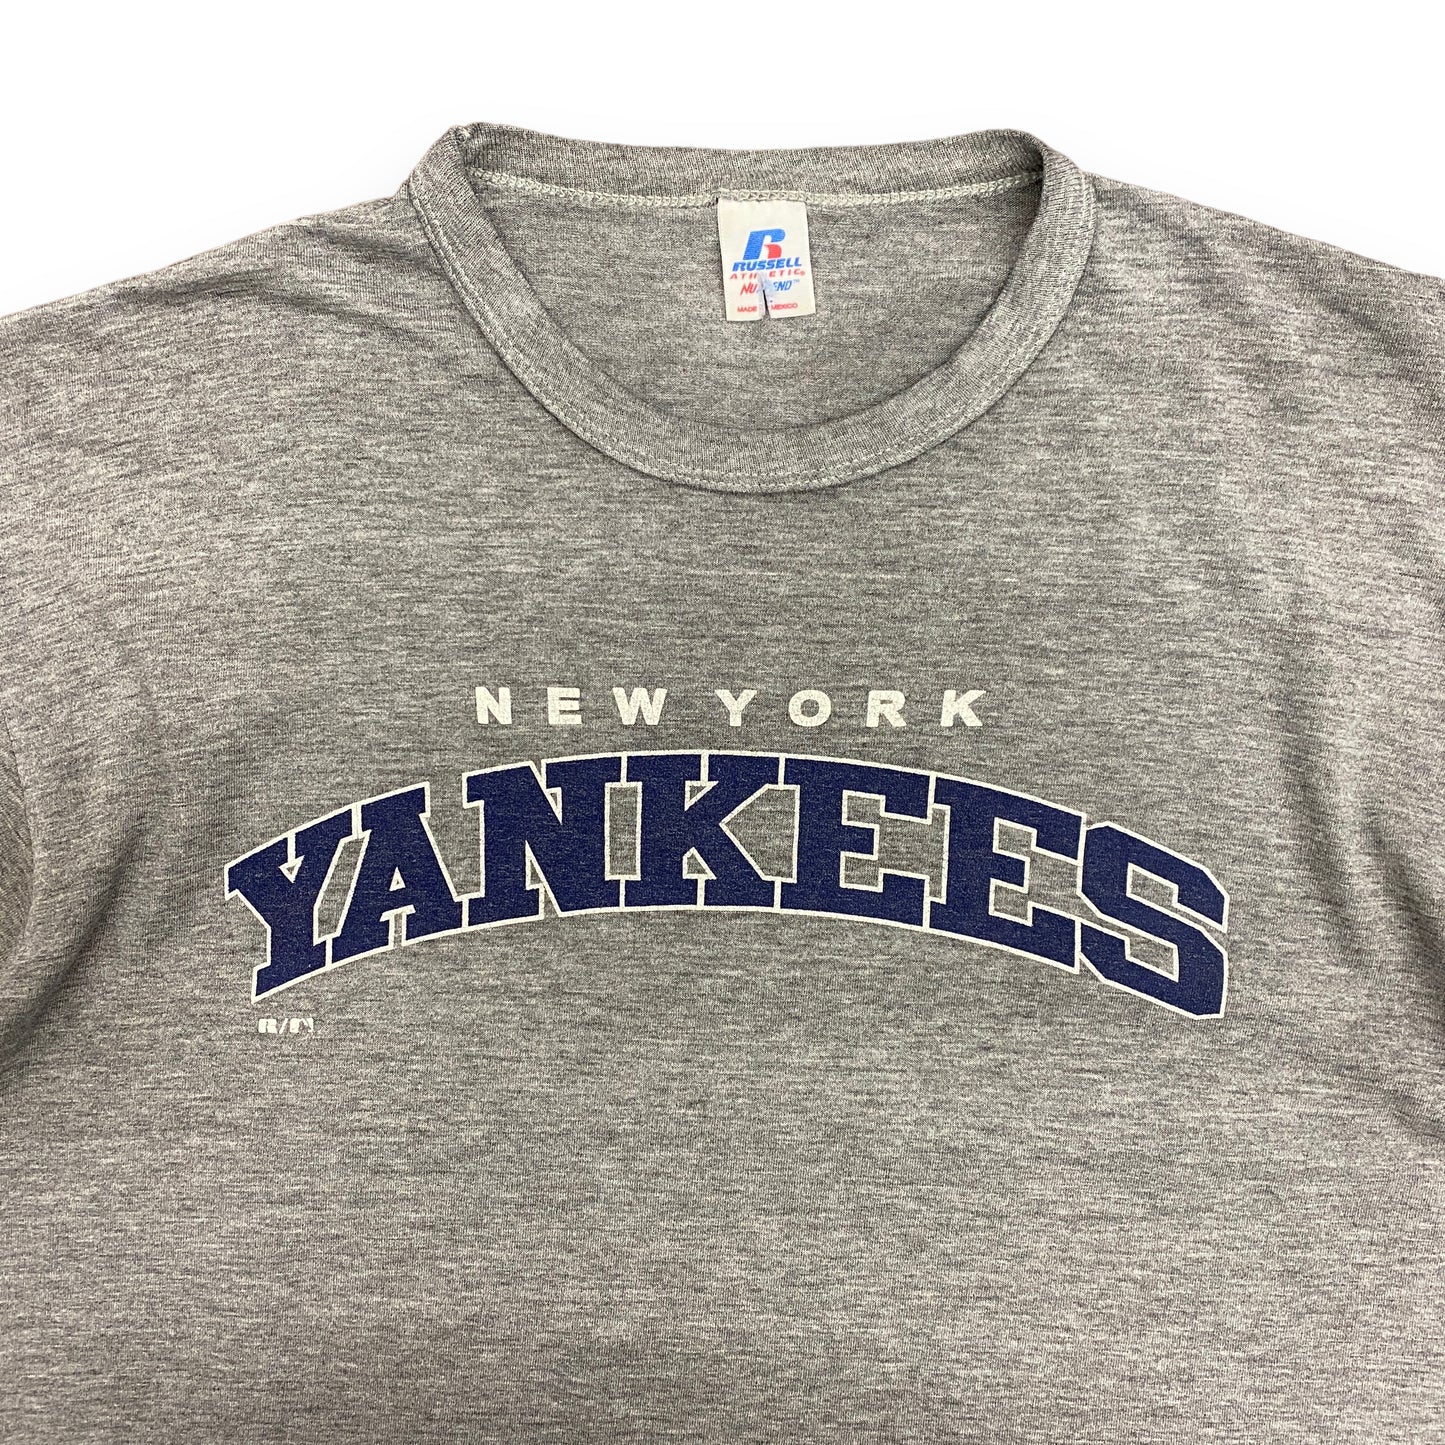 Y2K New York Yankees Russell Athletic Tee - Size Large